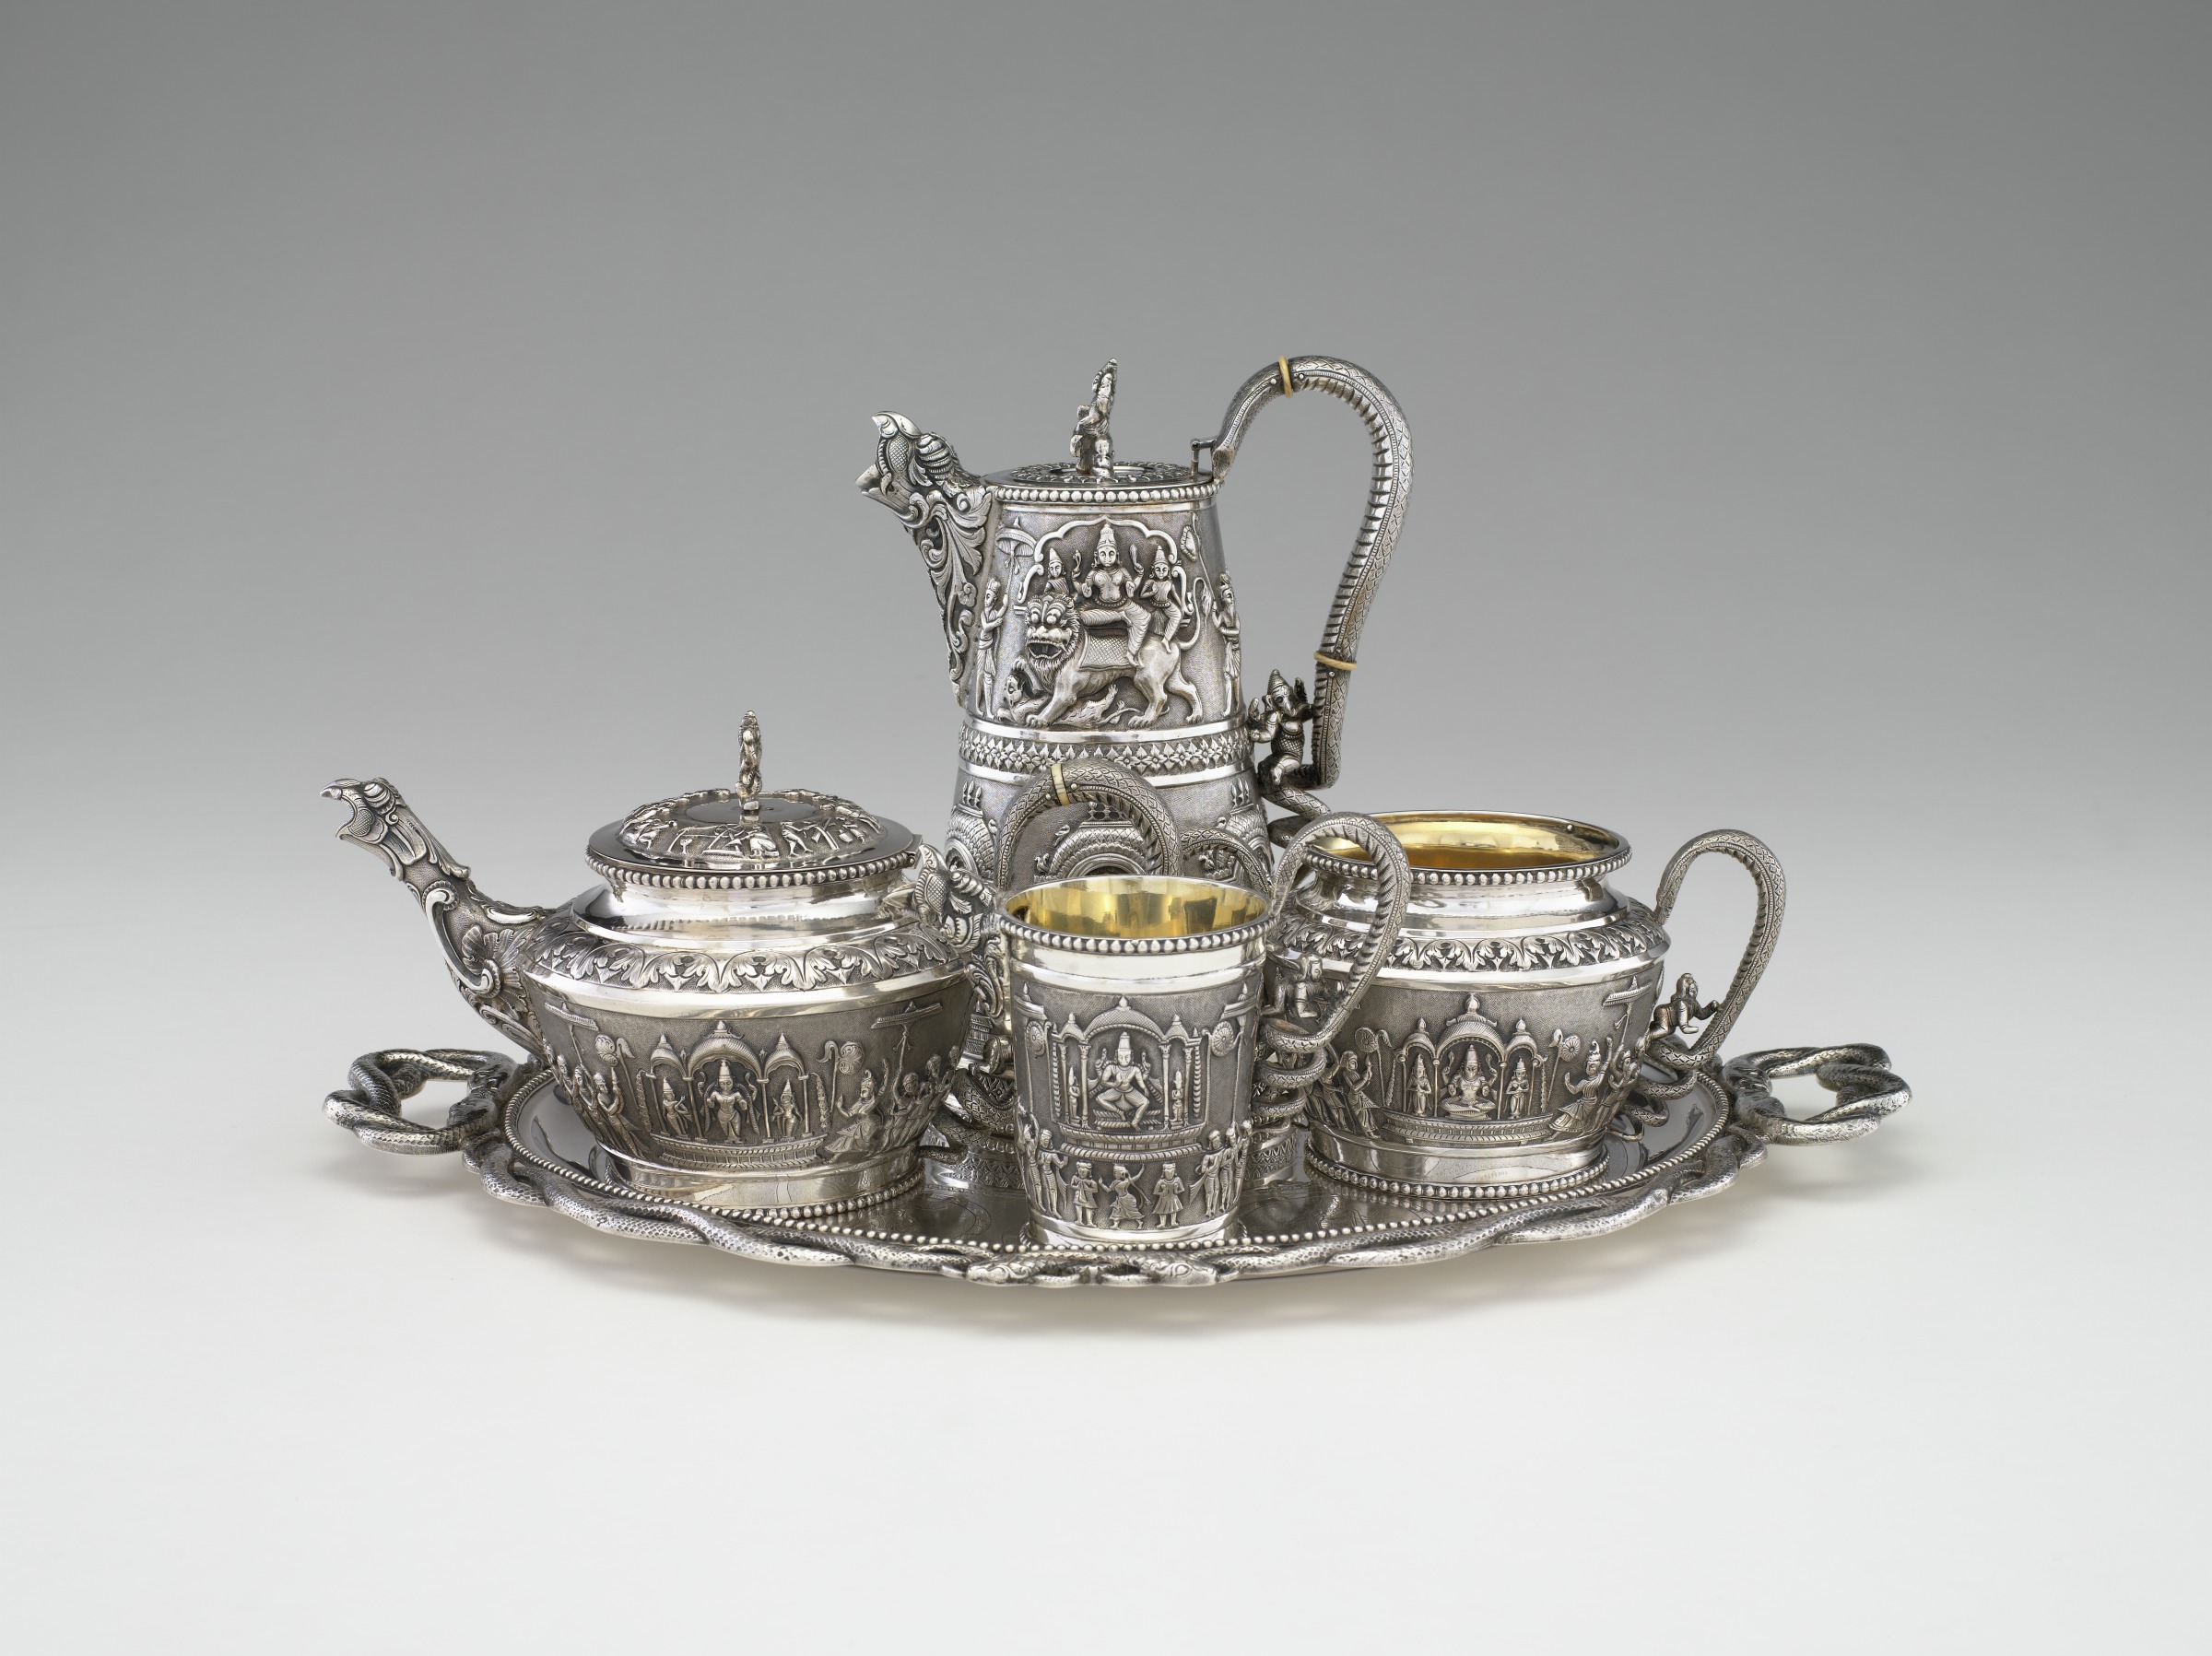 P. Orr and Sons (Madras, India), Five-Piece Tea Service, 1876, silver, gilding, ivory, Virginia Museum of Fine Arts, Gift of the estate of Paul F. Walter